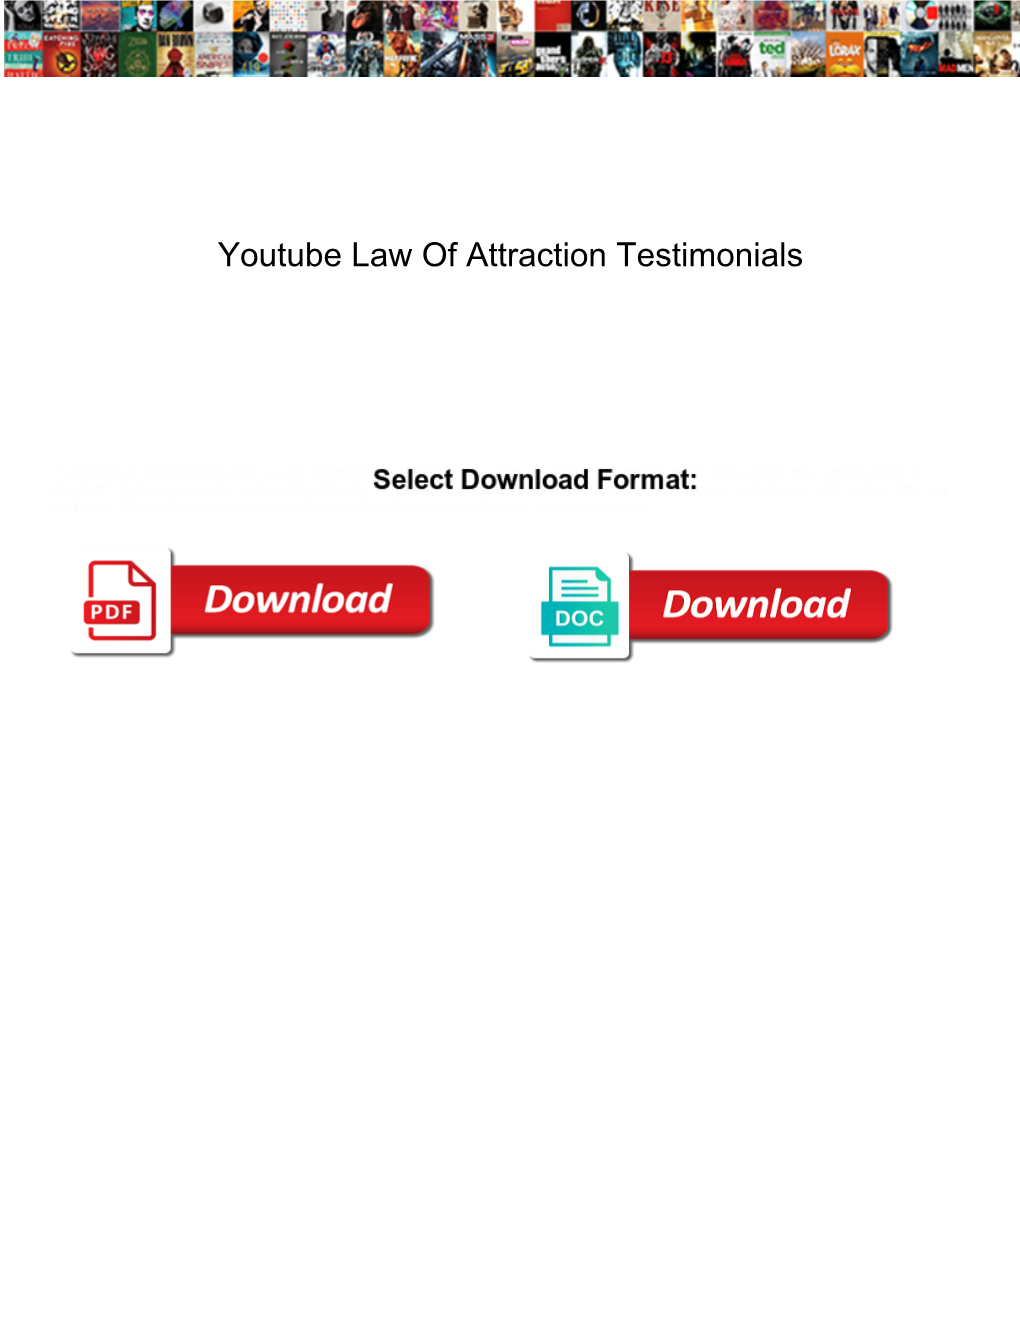 Youtube Law of Attraction Testimonials